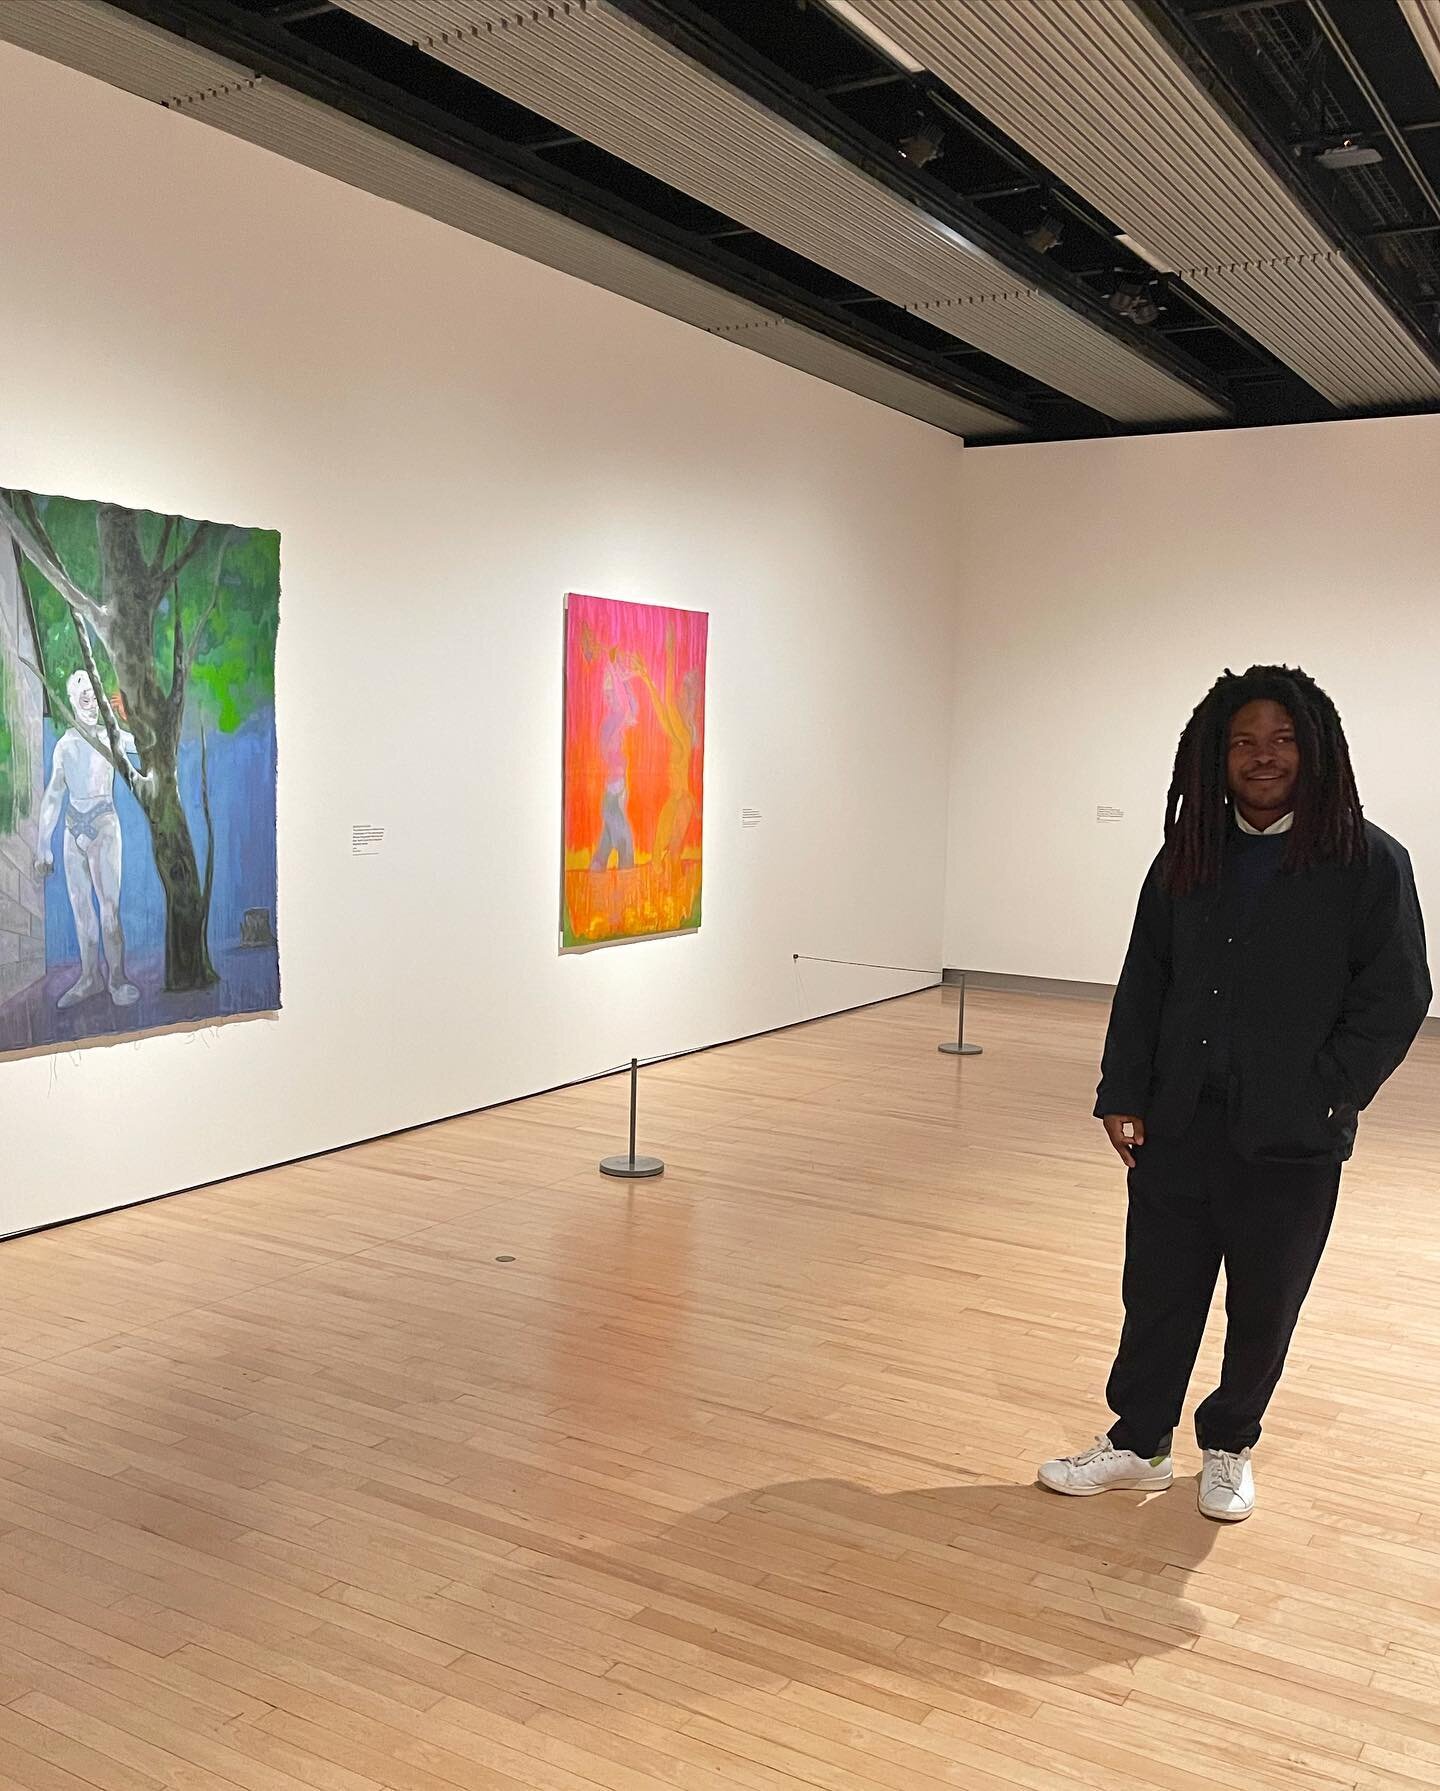 Proud of @sedrickchisom our resident artist last year to have an entire room devoted to his practice @hayward.gallery in London as part of &ldquo;In the Black Fantastic&rdquo; curated by @ekoweshun 
.
.
.
One of the works made @castelcaramel is also 